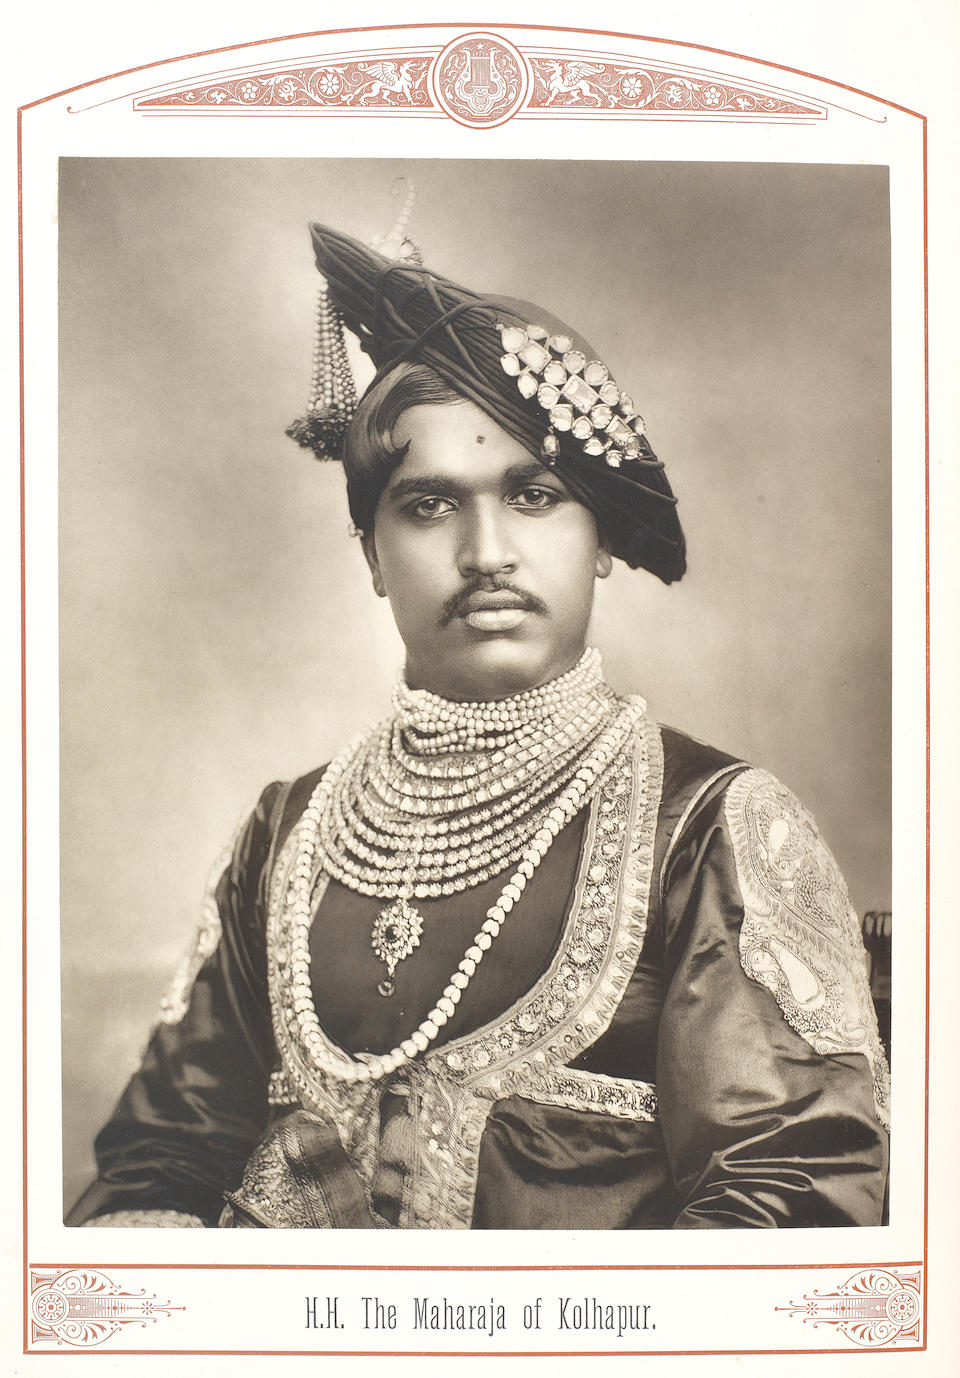 JEHANGIR (SORABJI) Princes and Chiefs of India. A Collection of Biographies and Portraits of the Indian Princes and Chiefs and Brief Historical Surveys of the Territories... Revised and Completed by F.S. Jehangir Tal&#233;yarkhan, 3 vol., FIRST EDITION, Waterlow & Sons, 1903